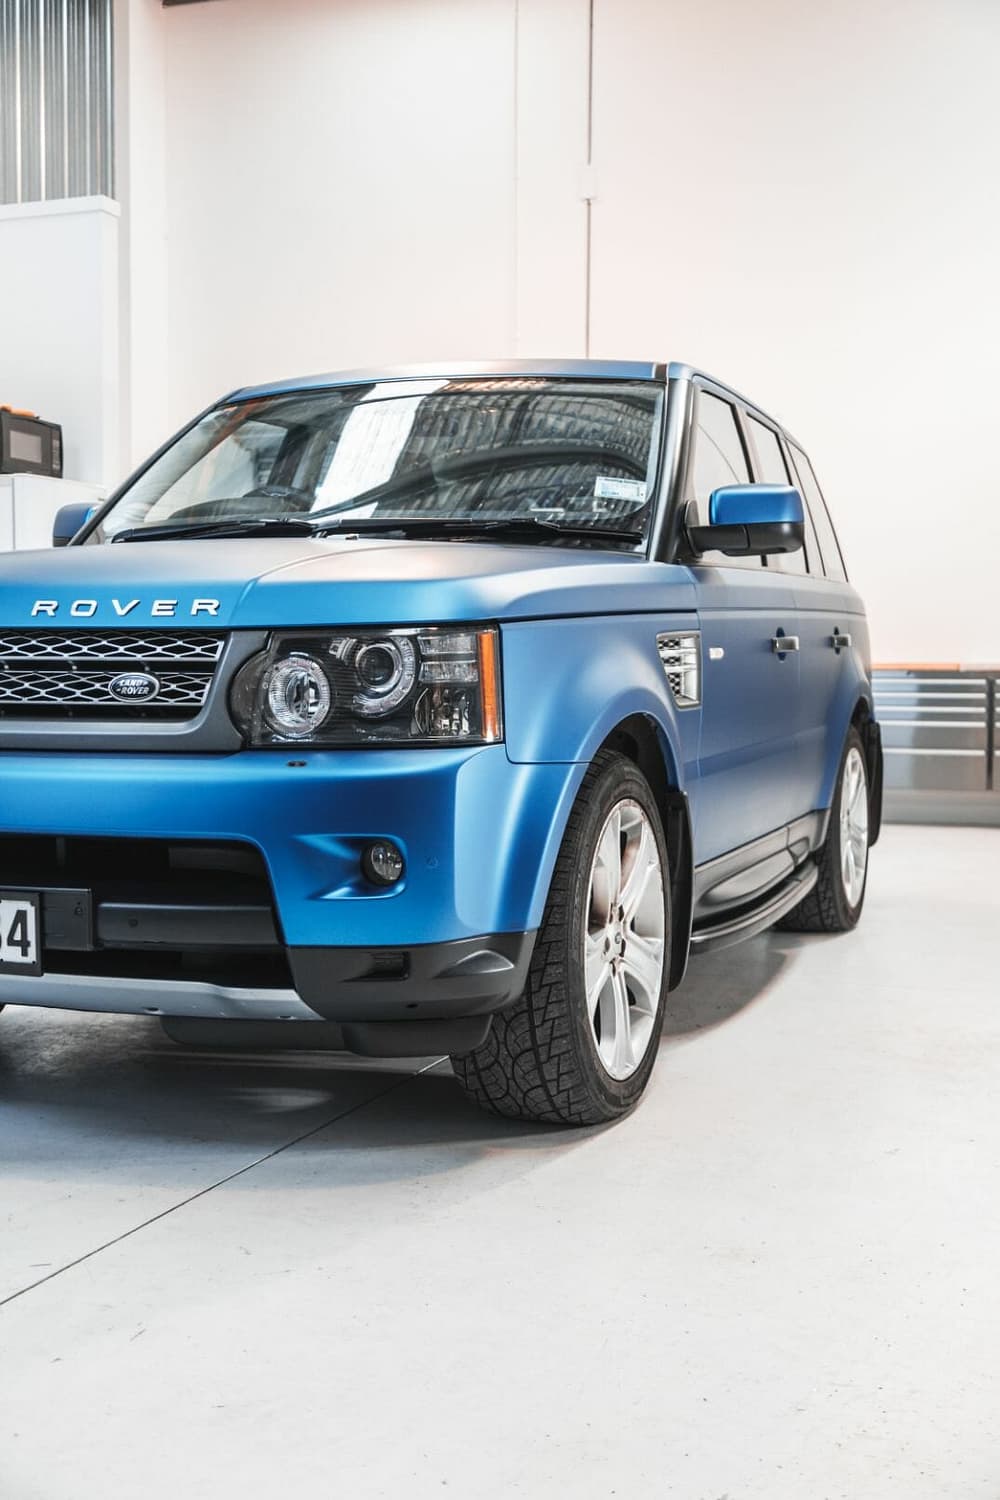 Wrap Innovations Gallery Range Rover 2 - Wrap Innovations - Car Wrap, Blackout, Window Tinting Specialist Wellington